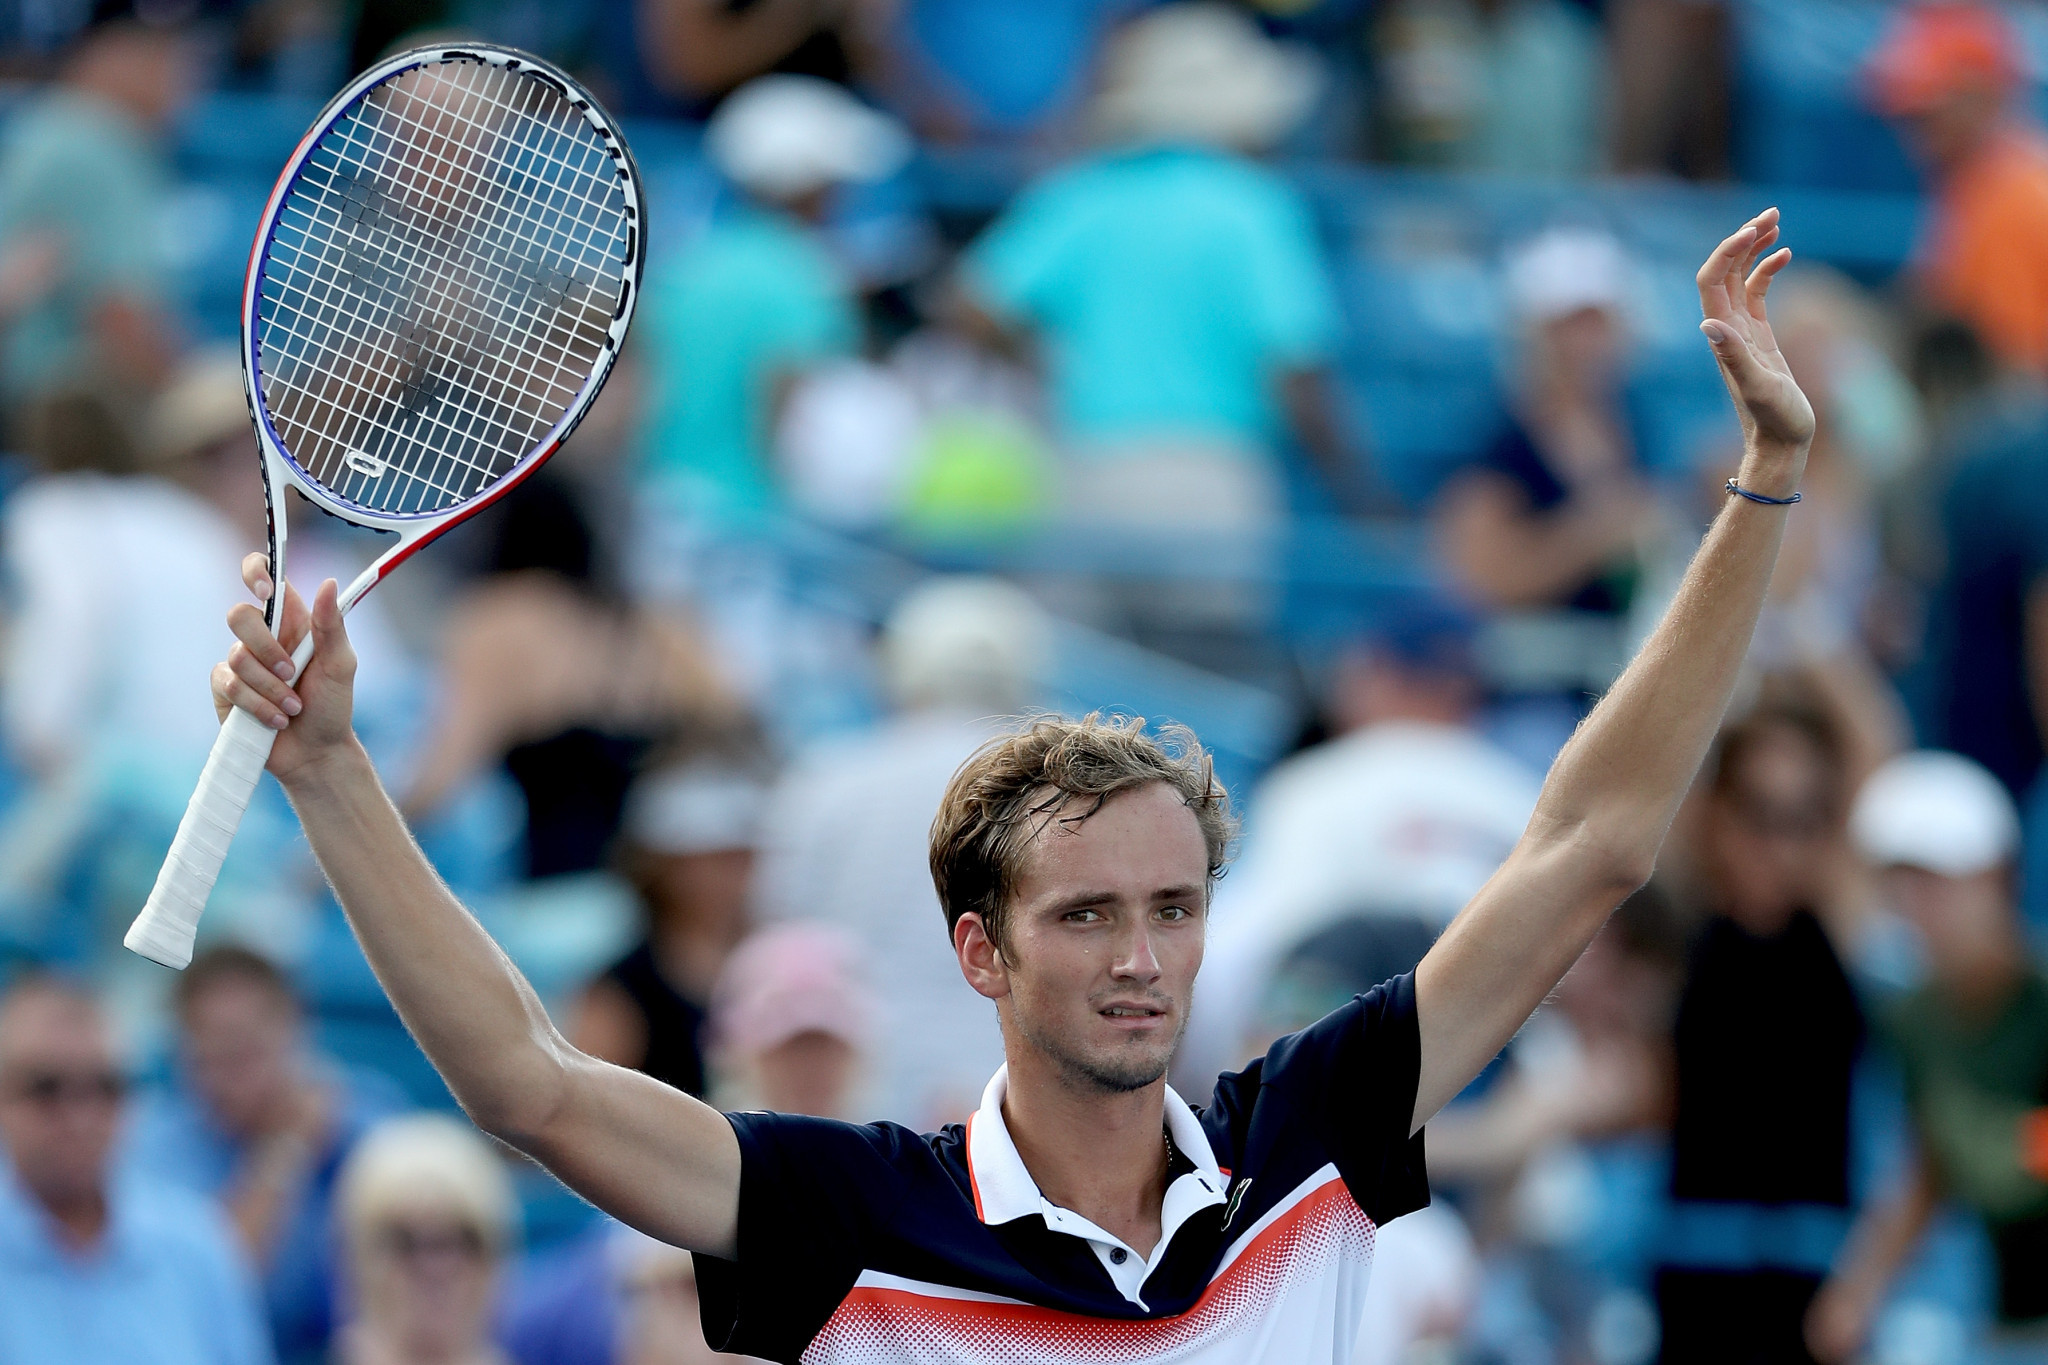 Russia's Daniil Medvedev secured his first-ever ATP Masters 1000 title after beating Belgium's David Goffin in straight sets in the Cincinnati Masters final ©Getty Images